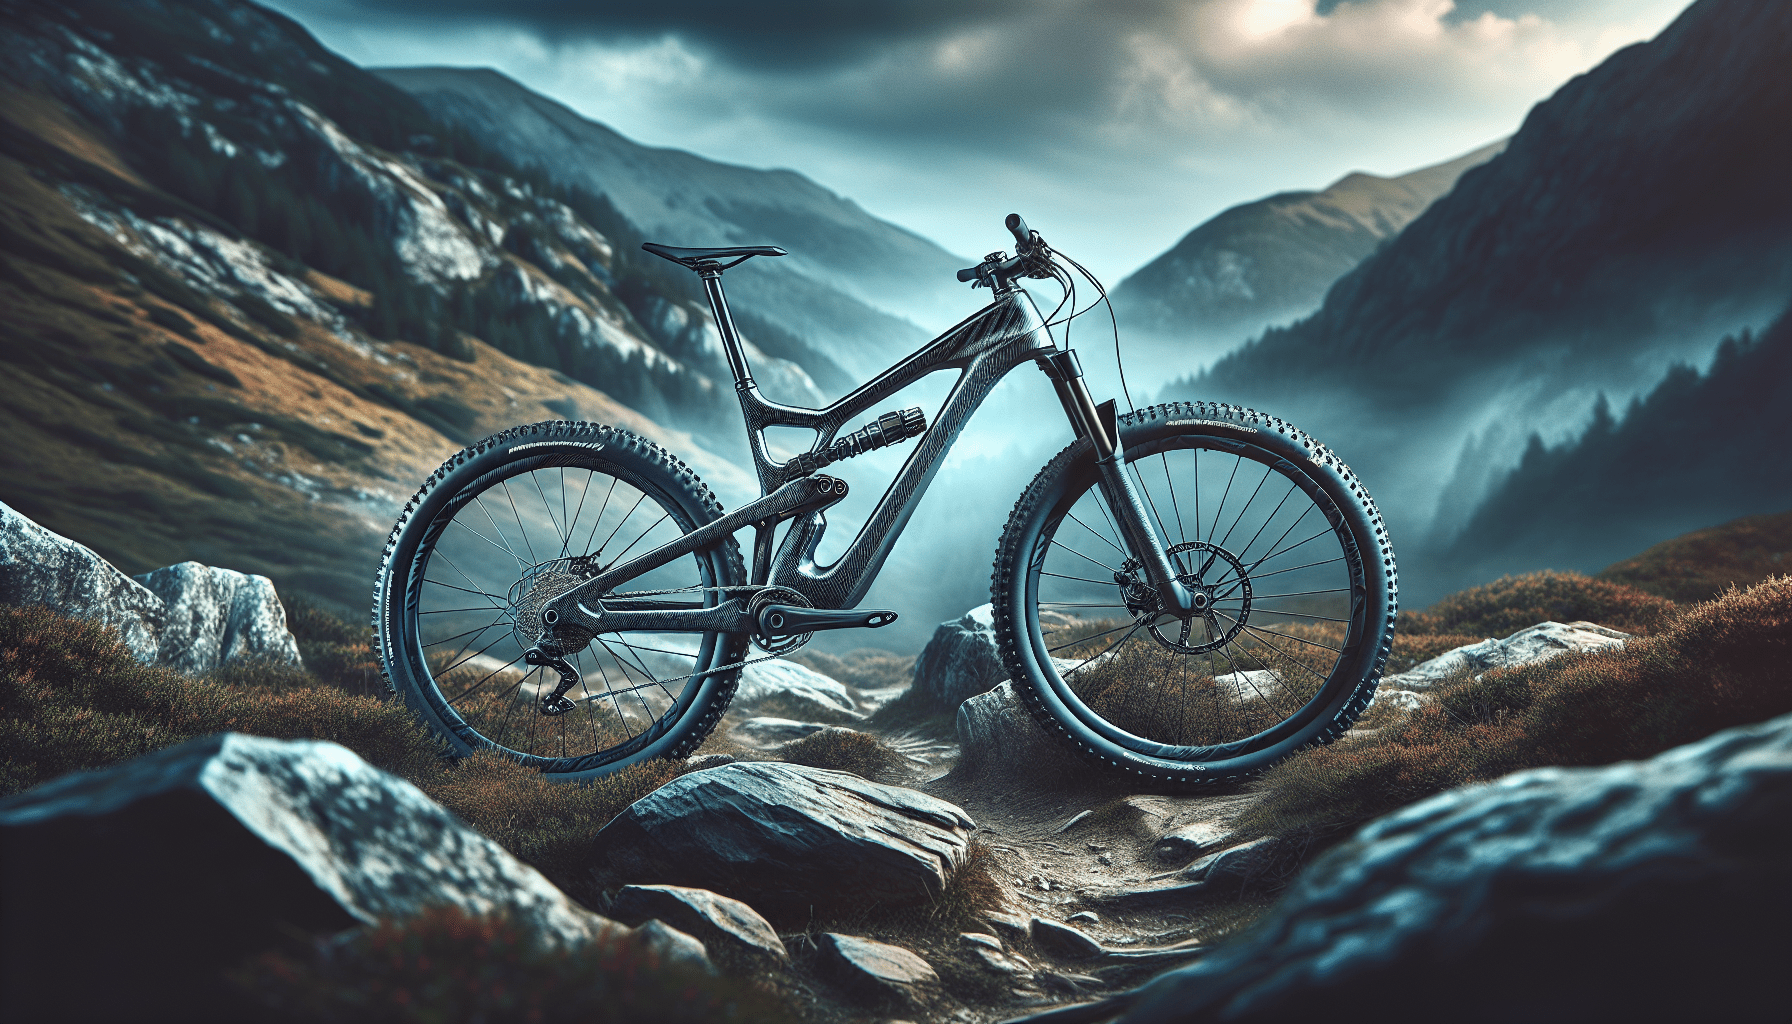 Uncover The Top 3 Carbon Bikes For Extreme Off-Road Adventures – Act Now!